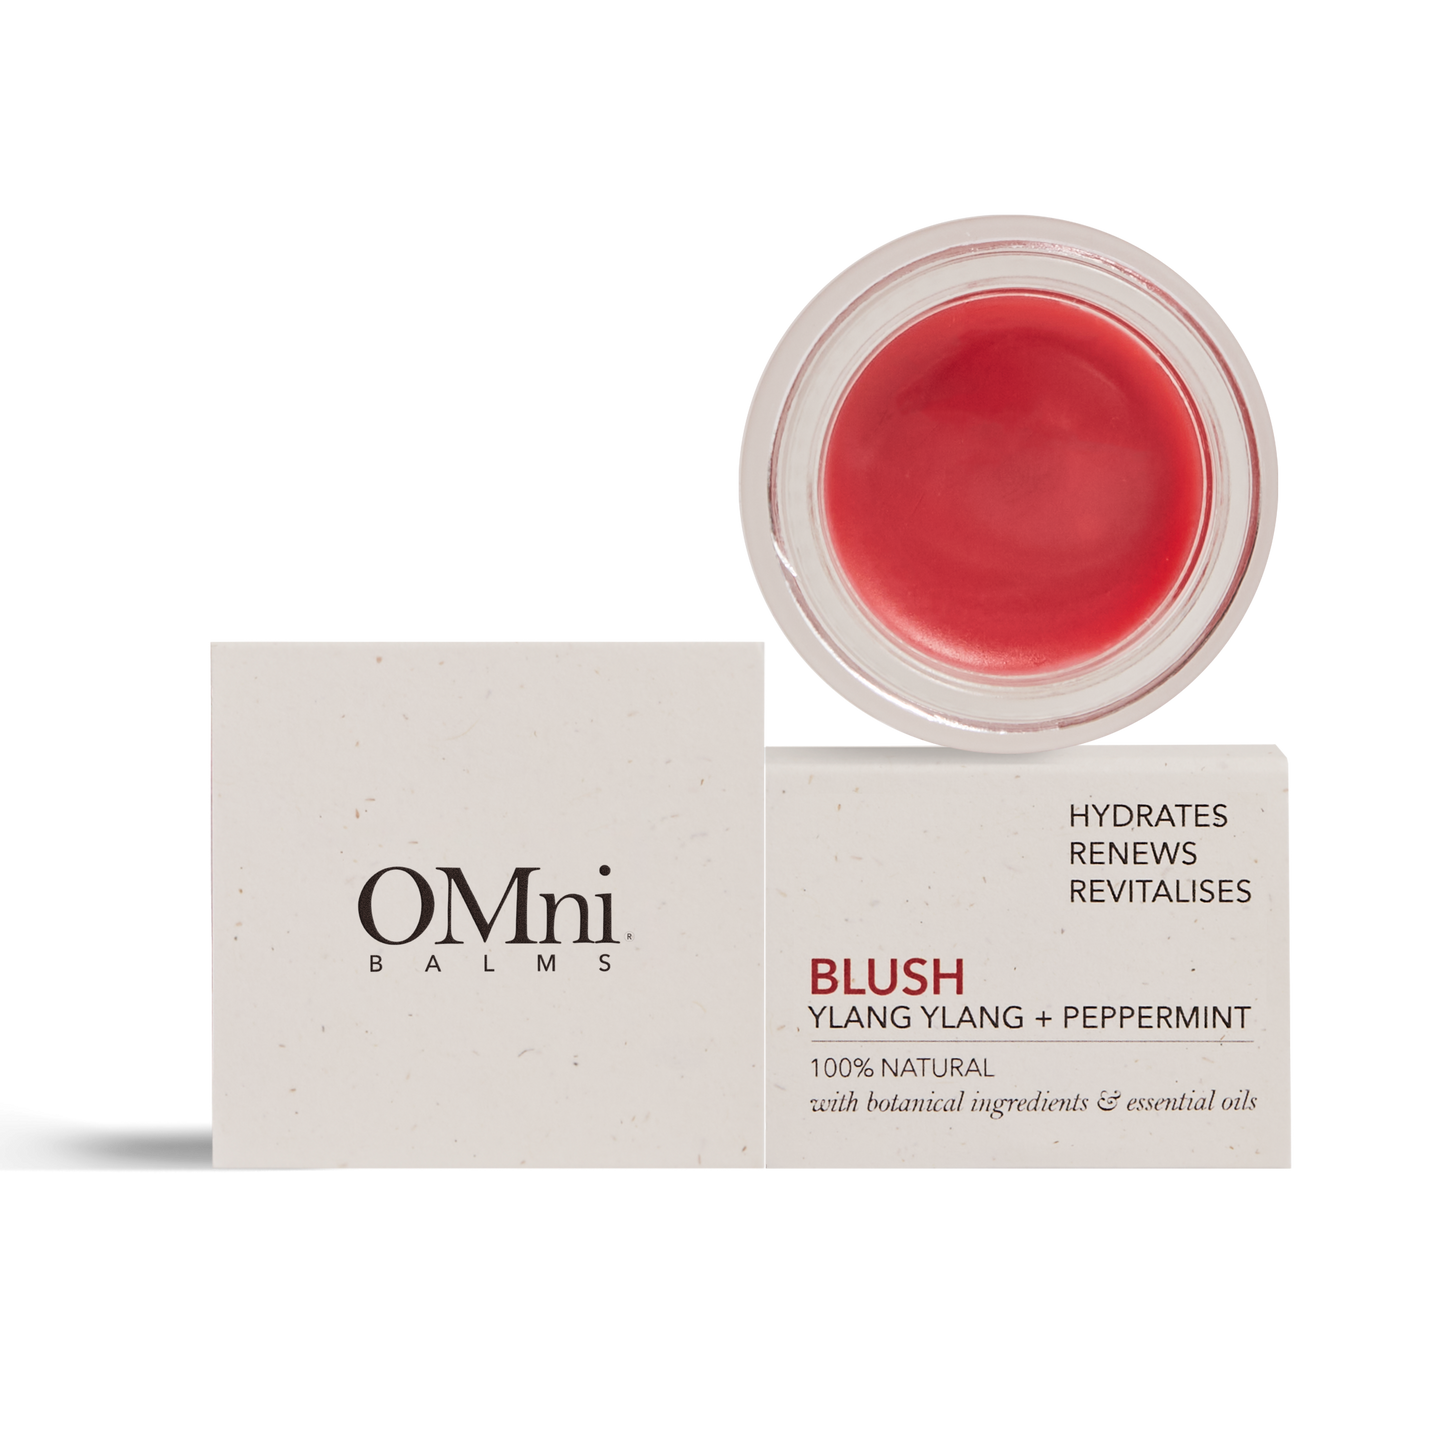 OMni Blush natural multi-use balm for dry lips and skin, and blush on cheeks